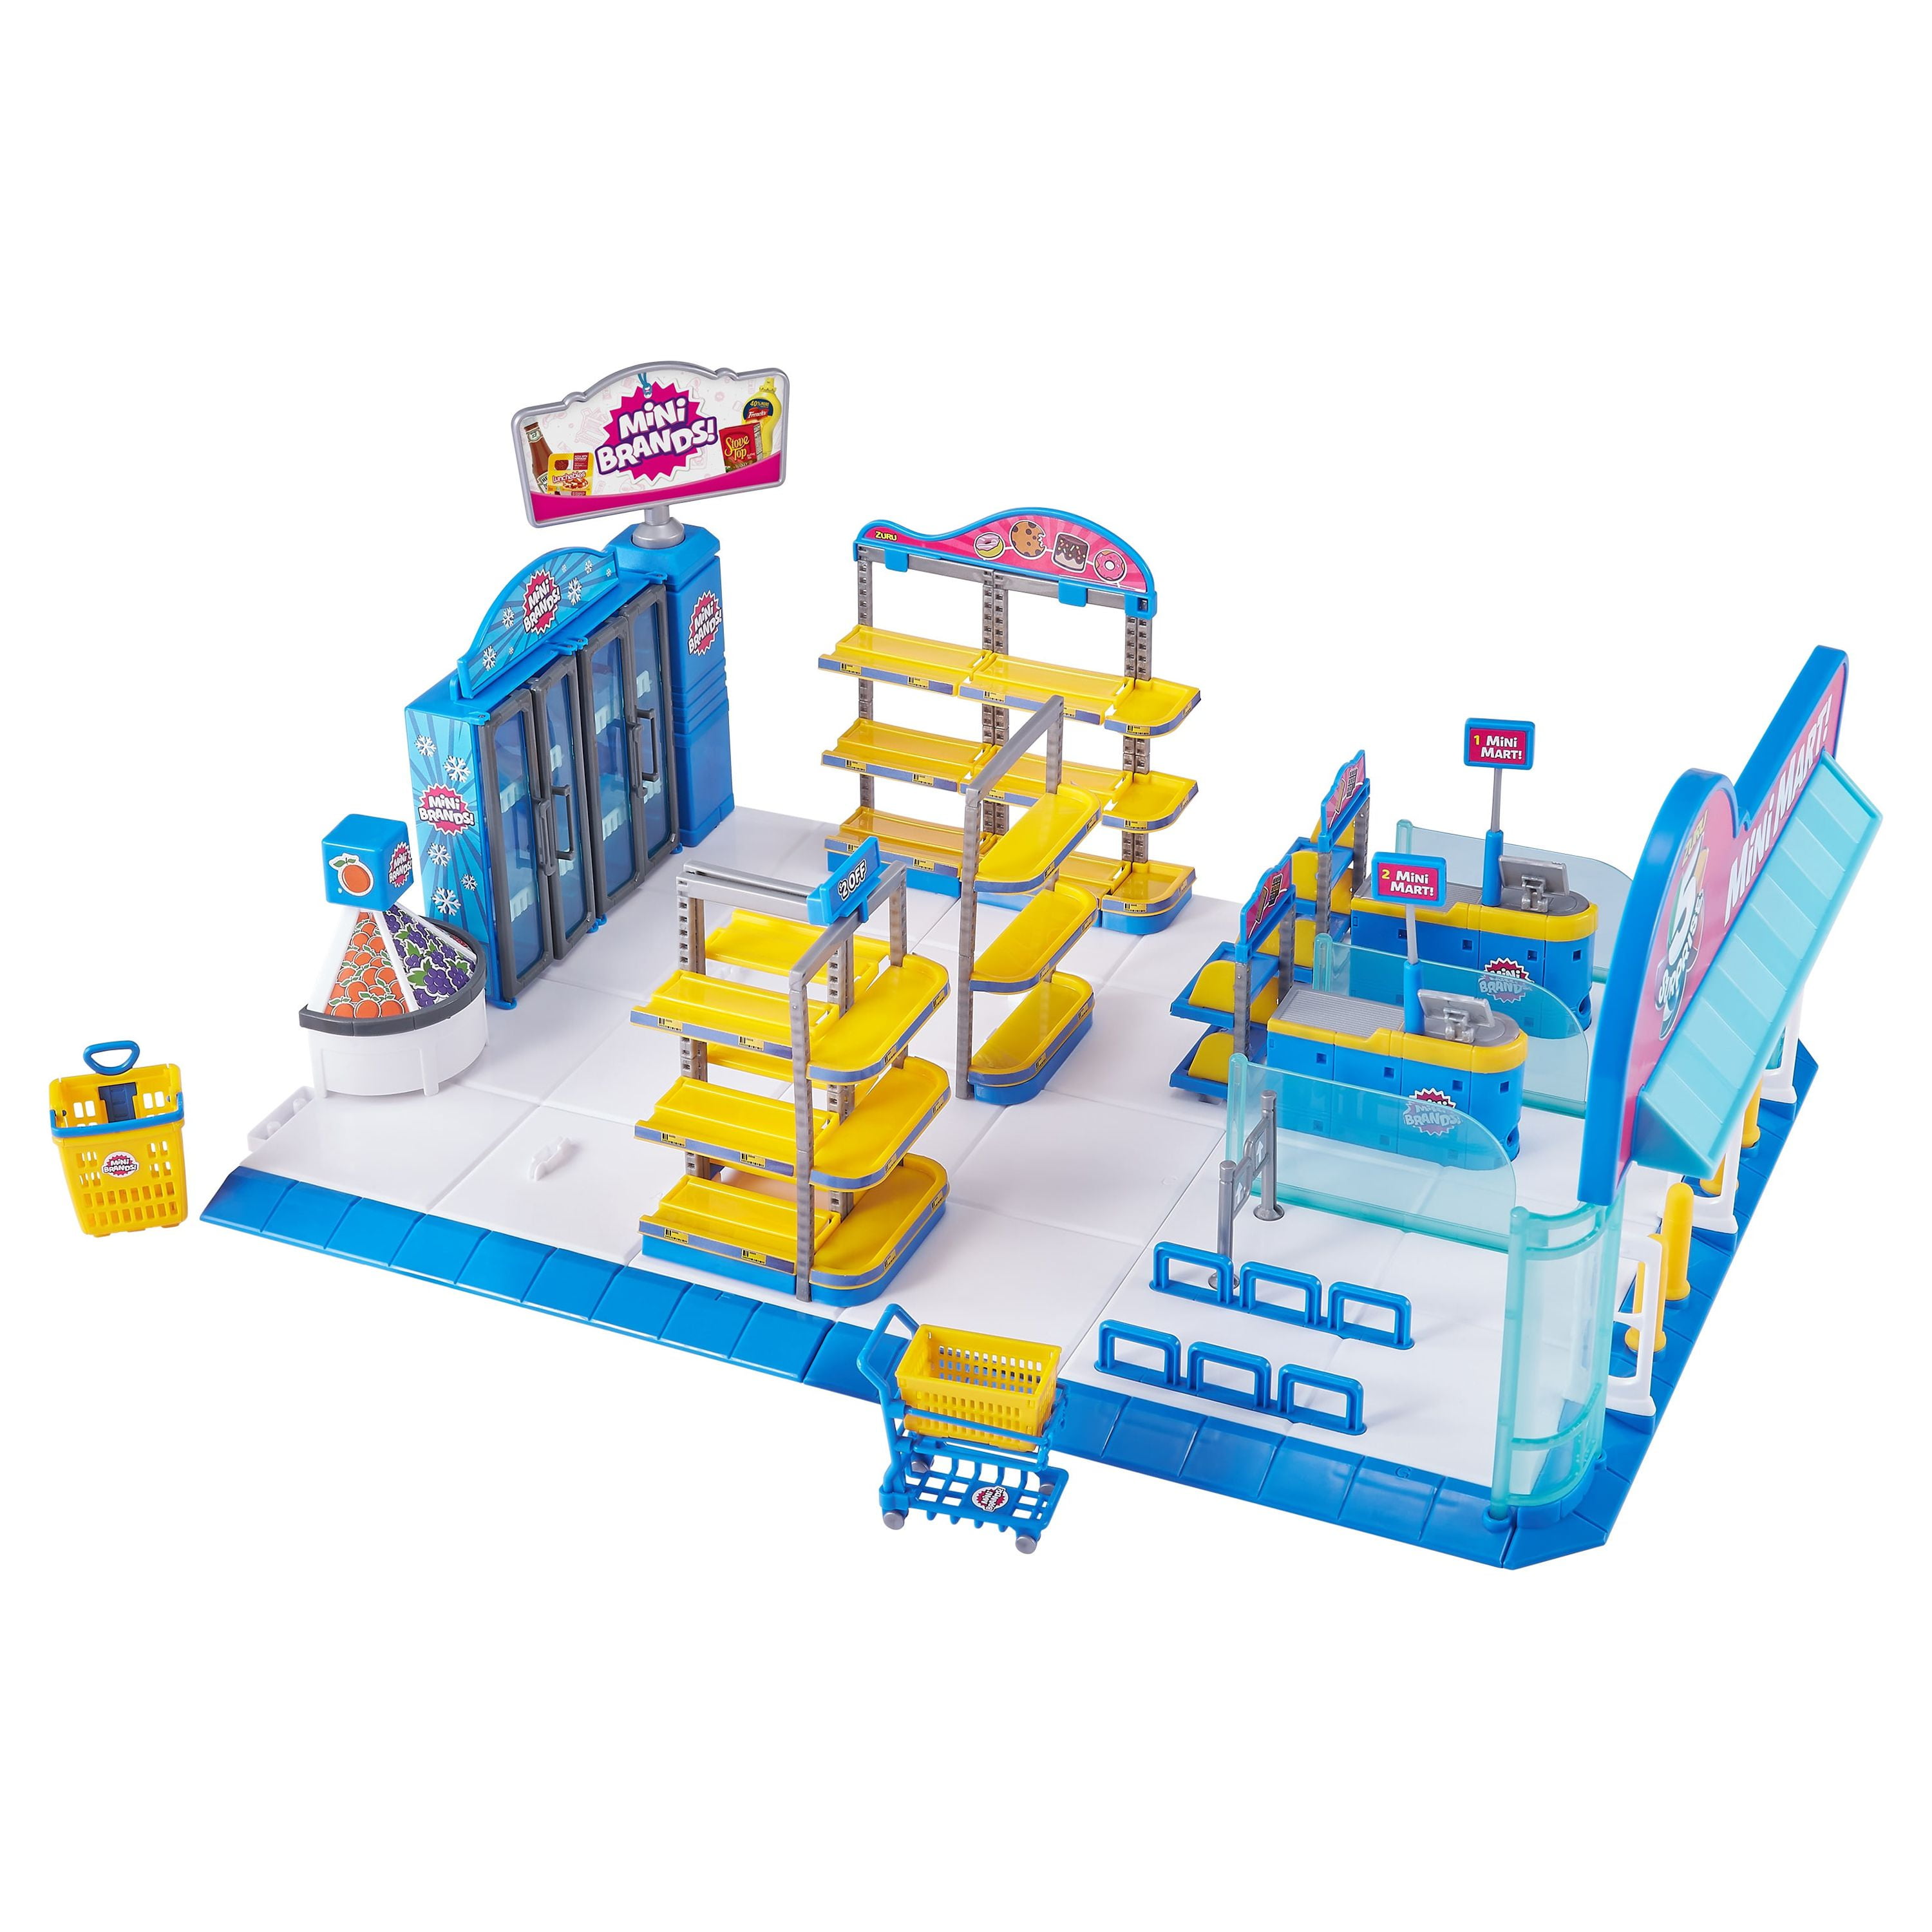 Toy Mini Brands Series 2 Mini Toy Shop Playset by ZURU For Ages